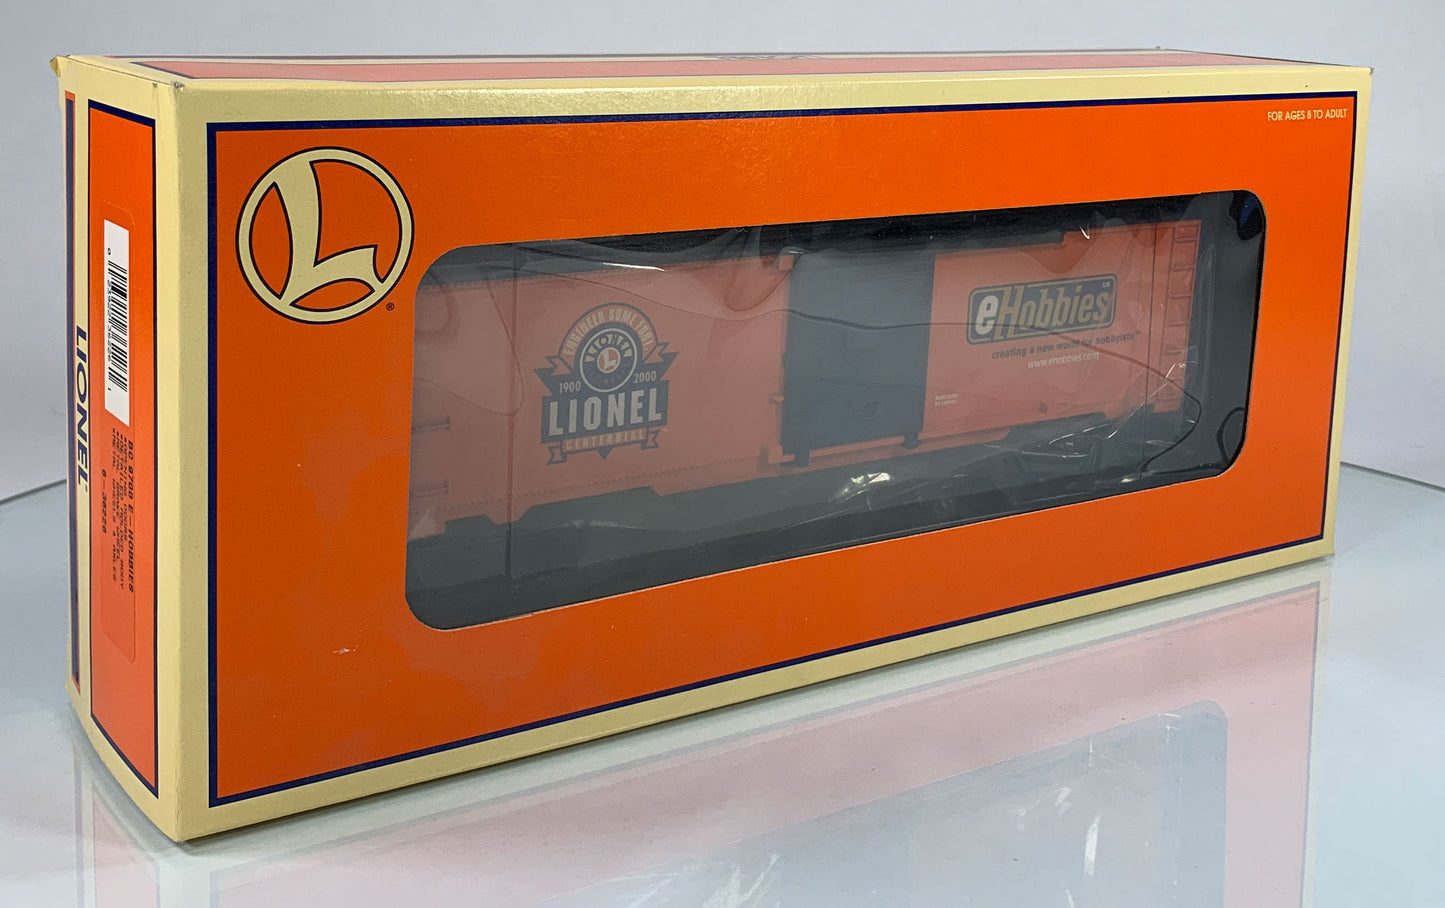 LIONEL • O GAUGE • Limited Edition 2000 eHobbies Boxcar 6-36226 • NEW OLD STOCK